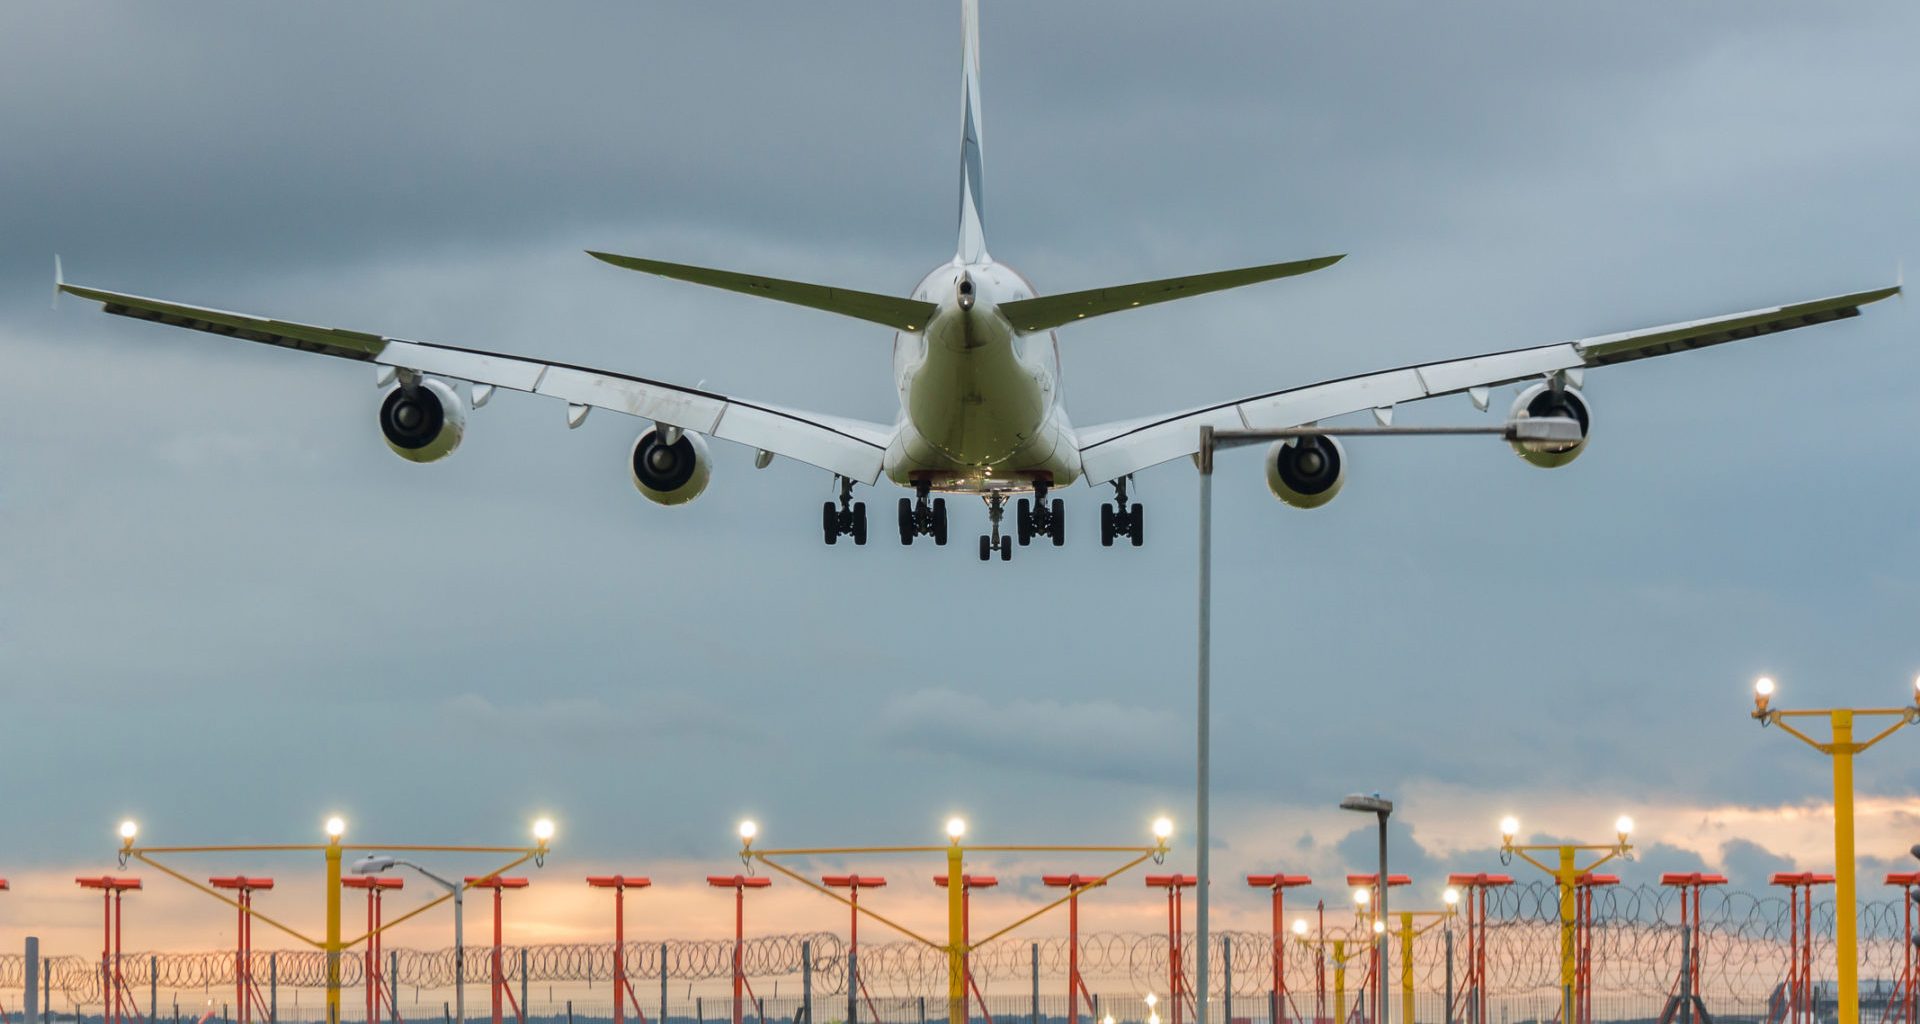 Government accused of ‘greenwashing deal’ in support of Heathrow 5